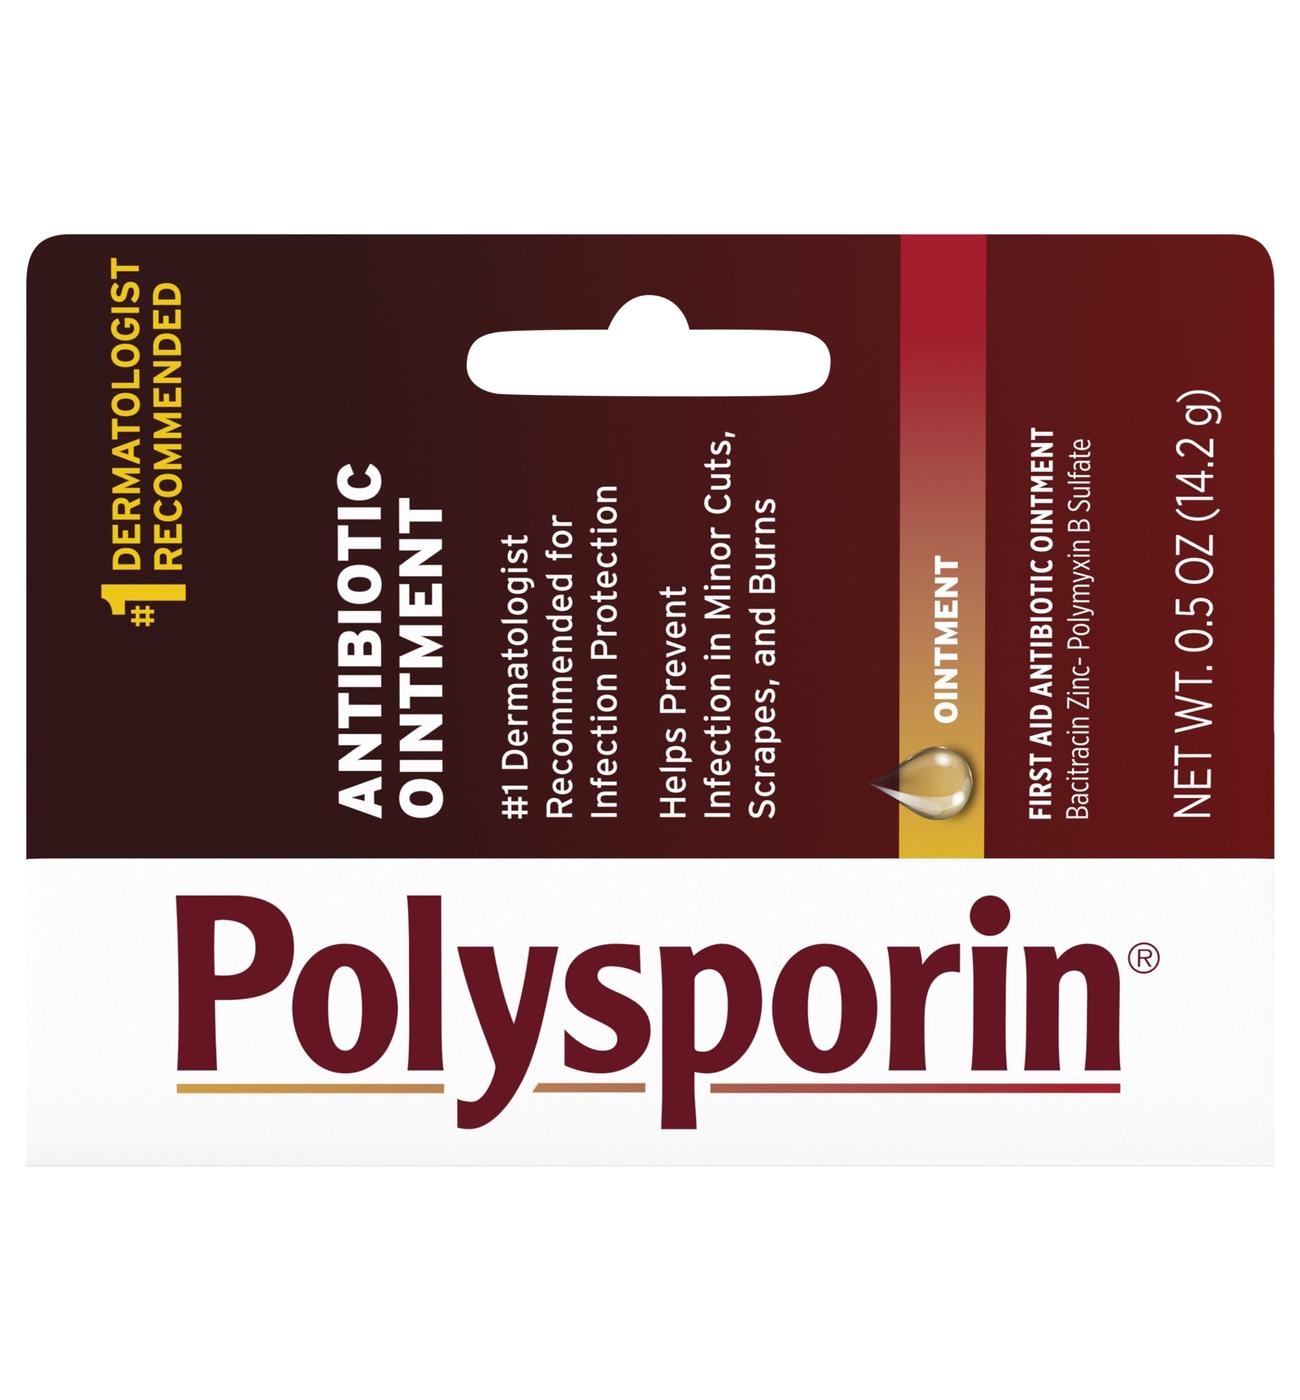 Polysporin First Aid Antibiotic Ointment; image 1 of 5